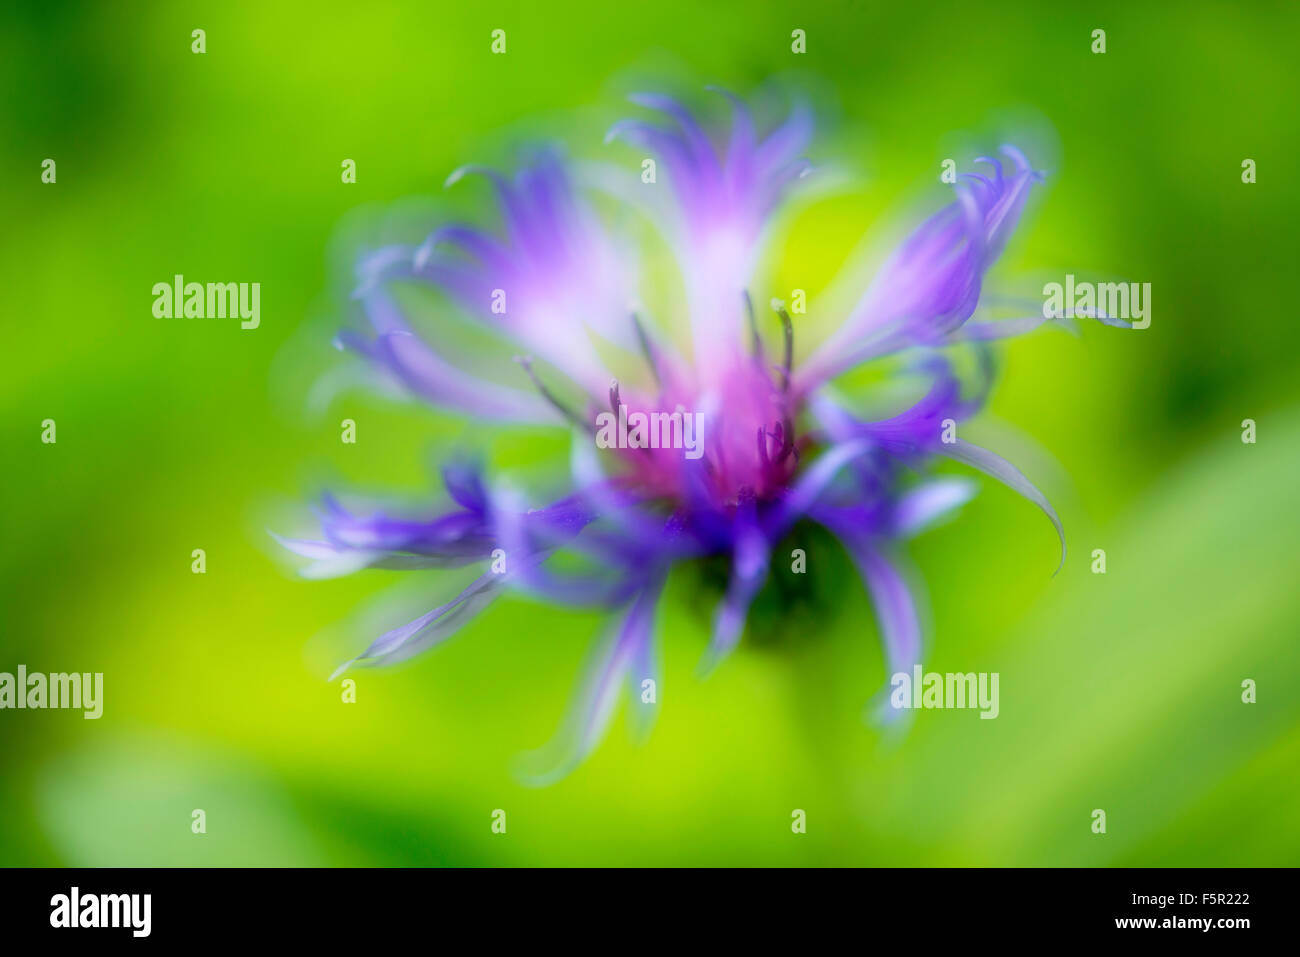 Soft image of a Centaurea Montana flower with green background. Stock Photo